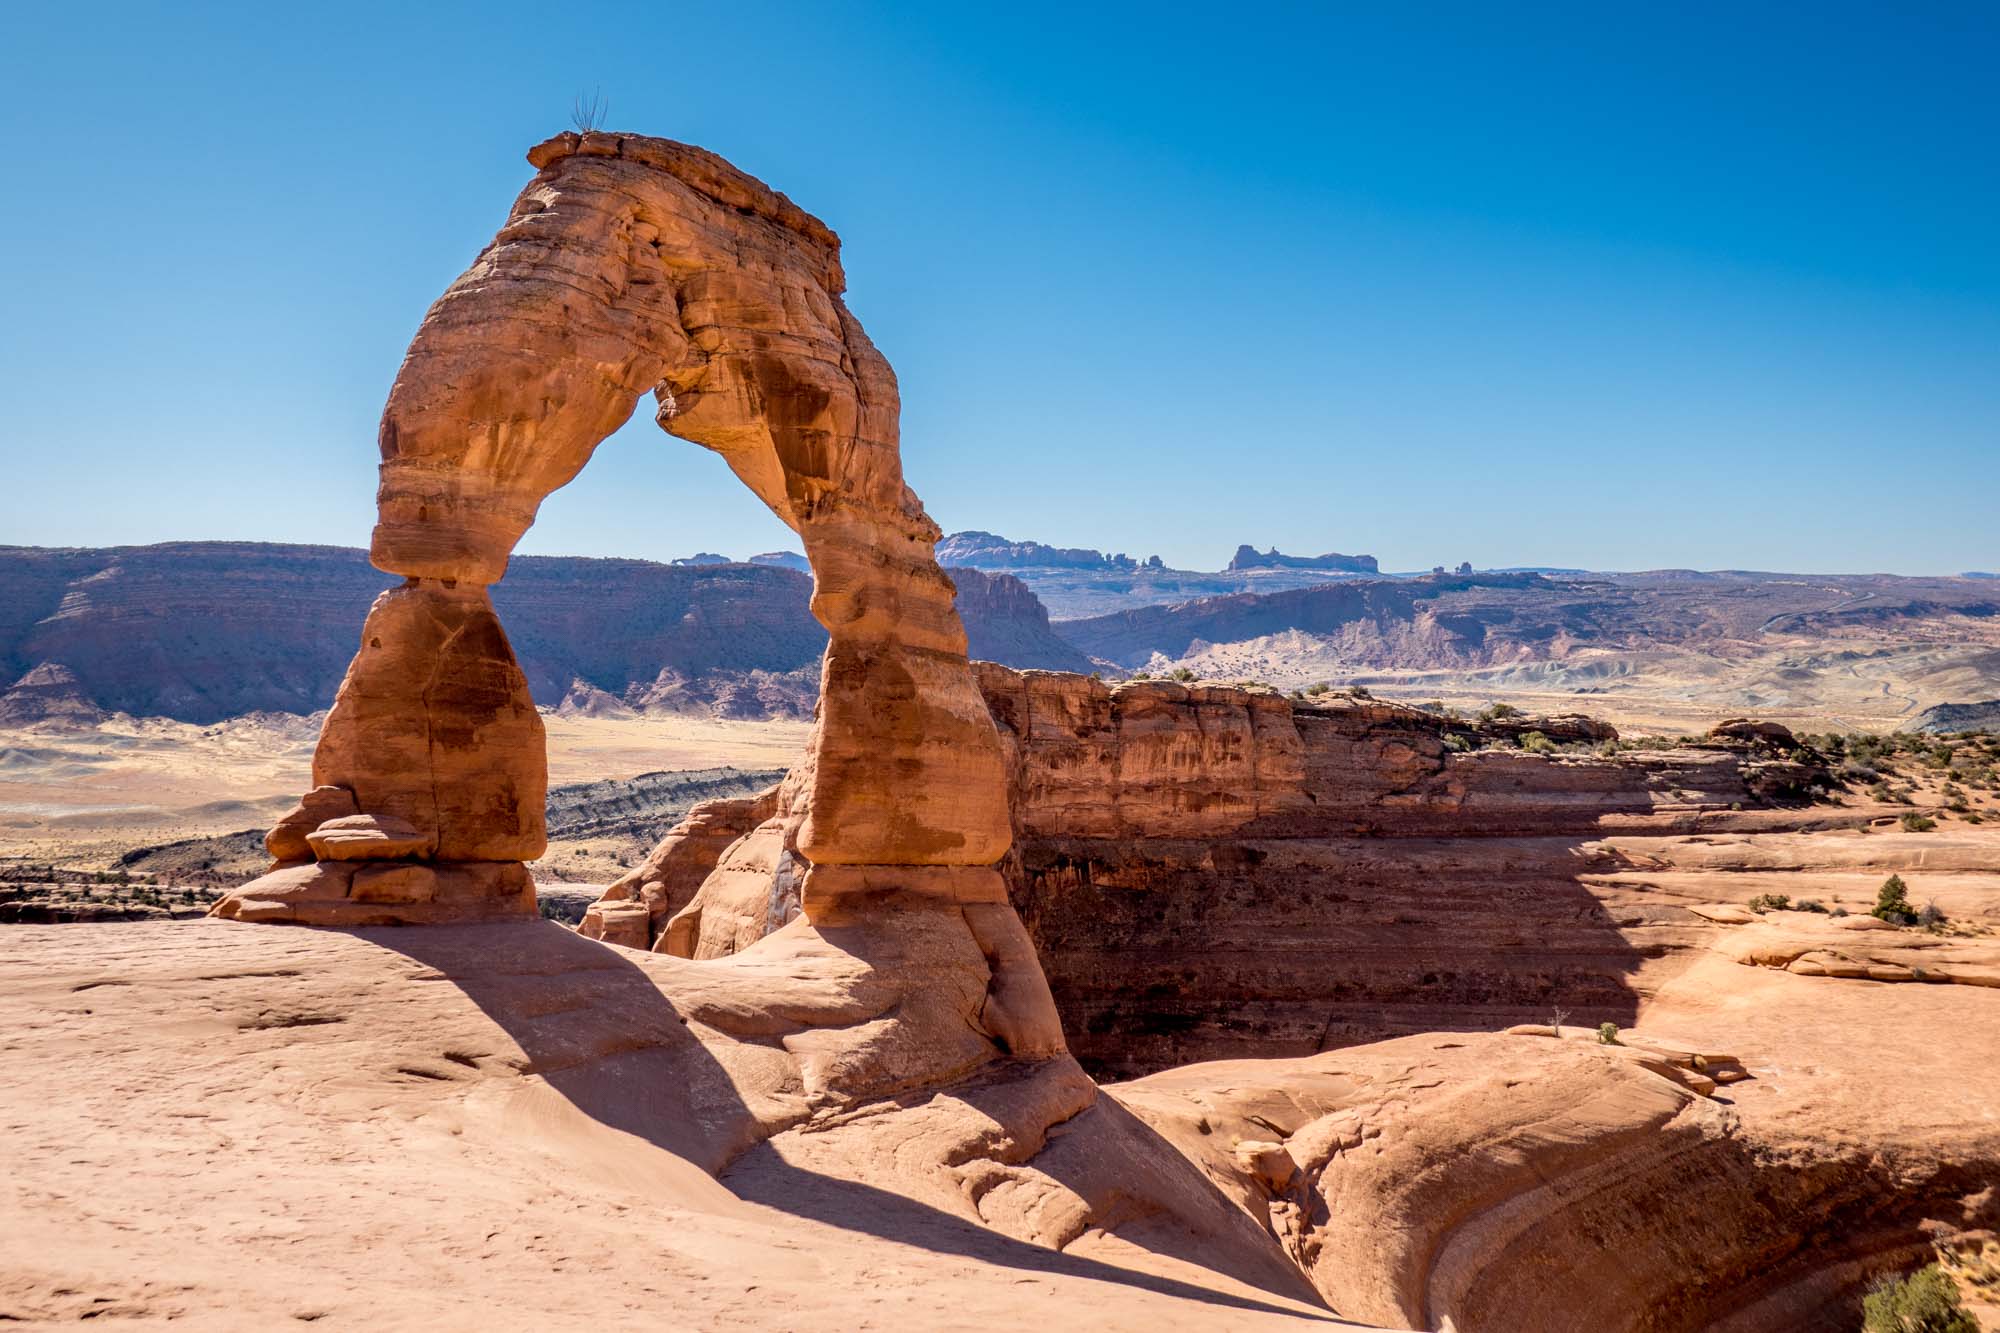 The famous Delicate Arch in Utah